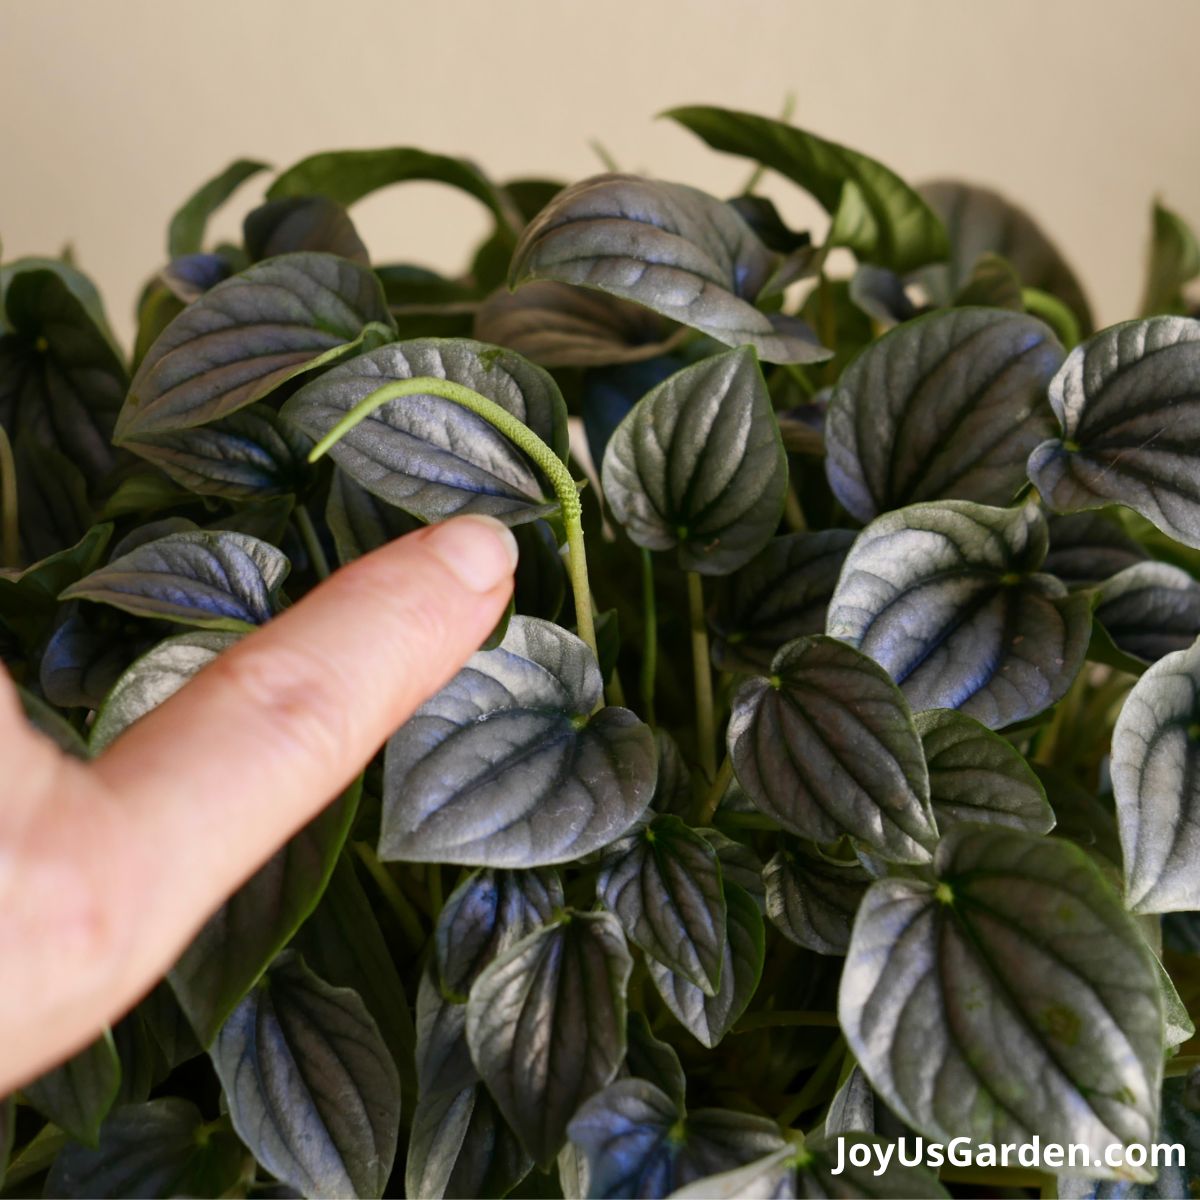 nell foster finger pointing at the green flower spike of a silver ripple peperomia 